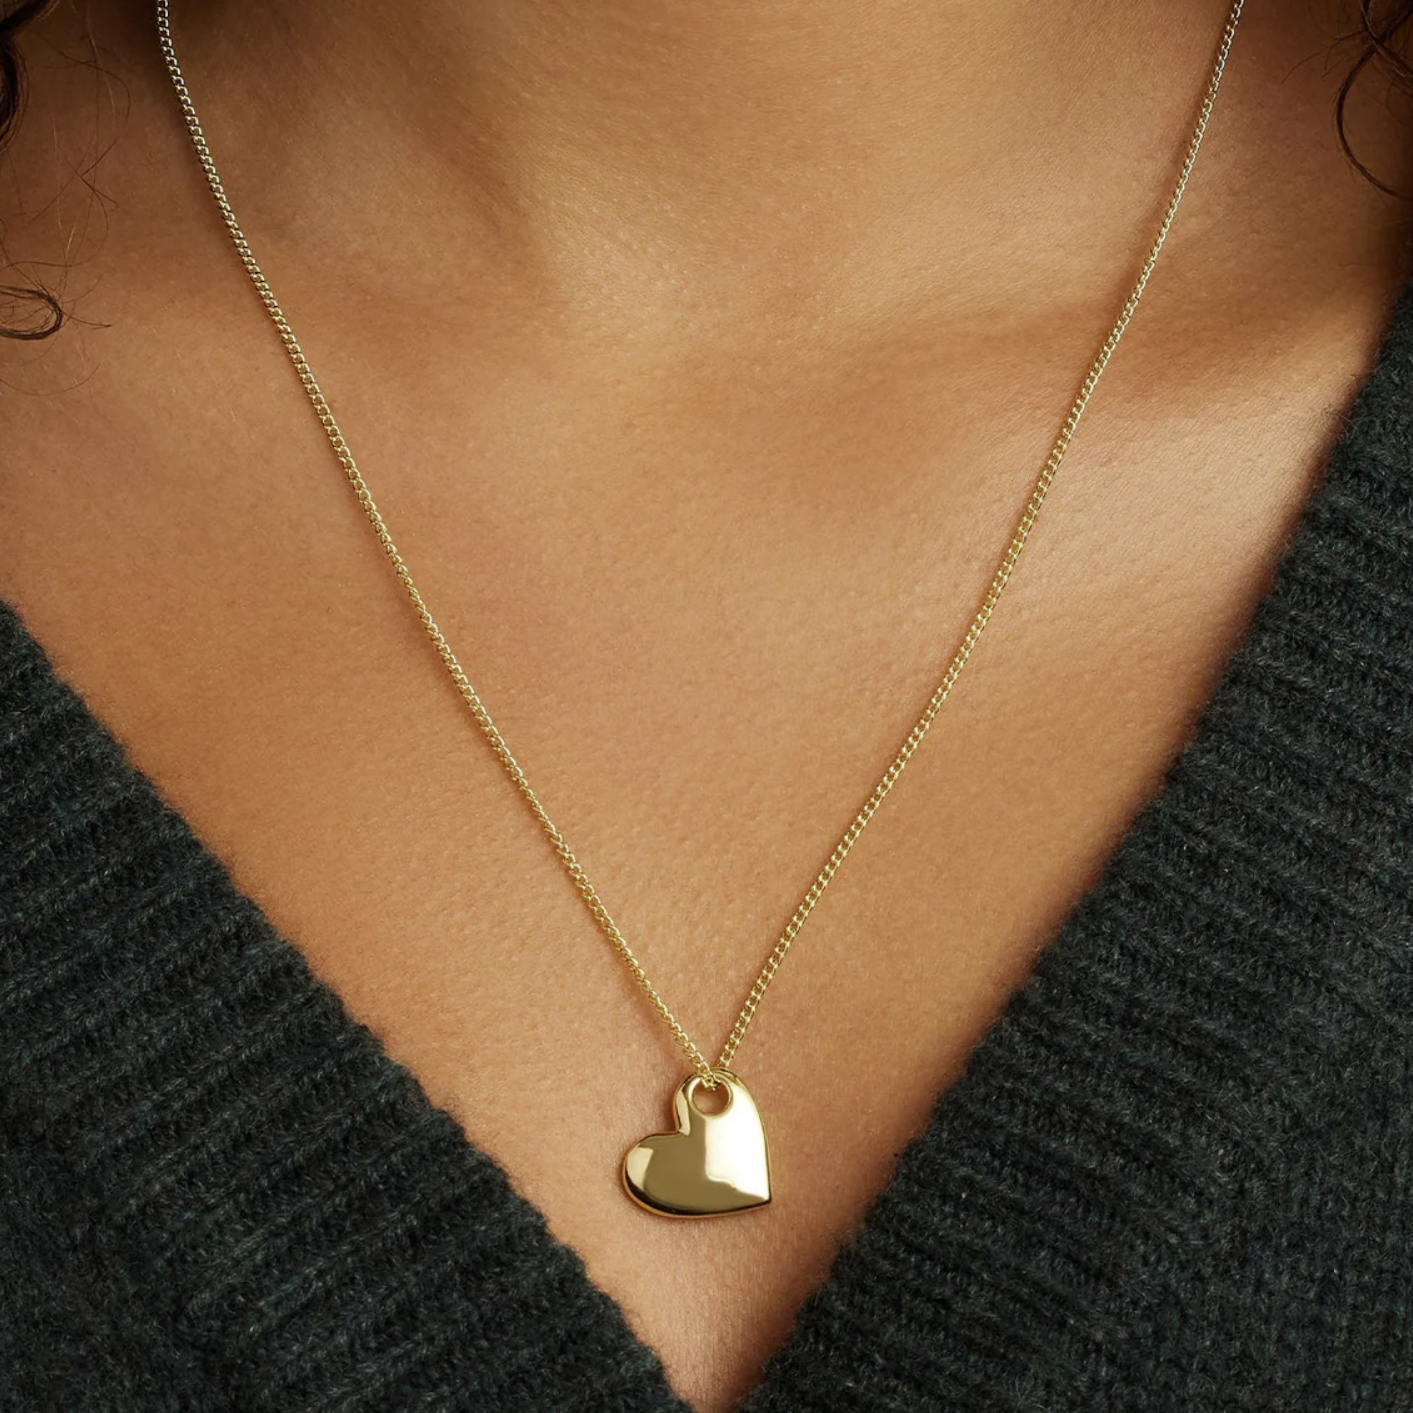 Lou Heart Pendant Necklace in Gold